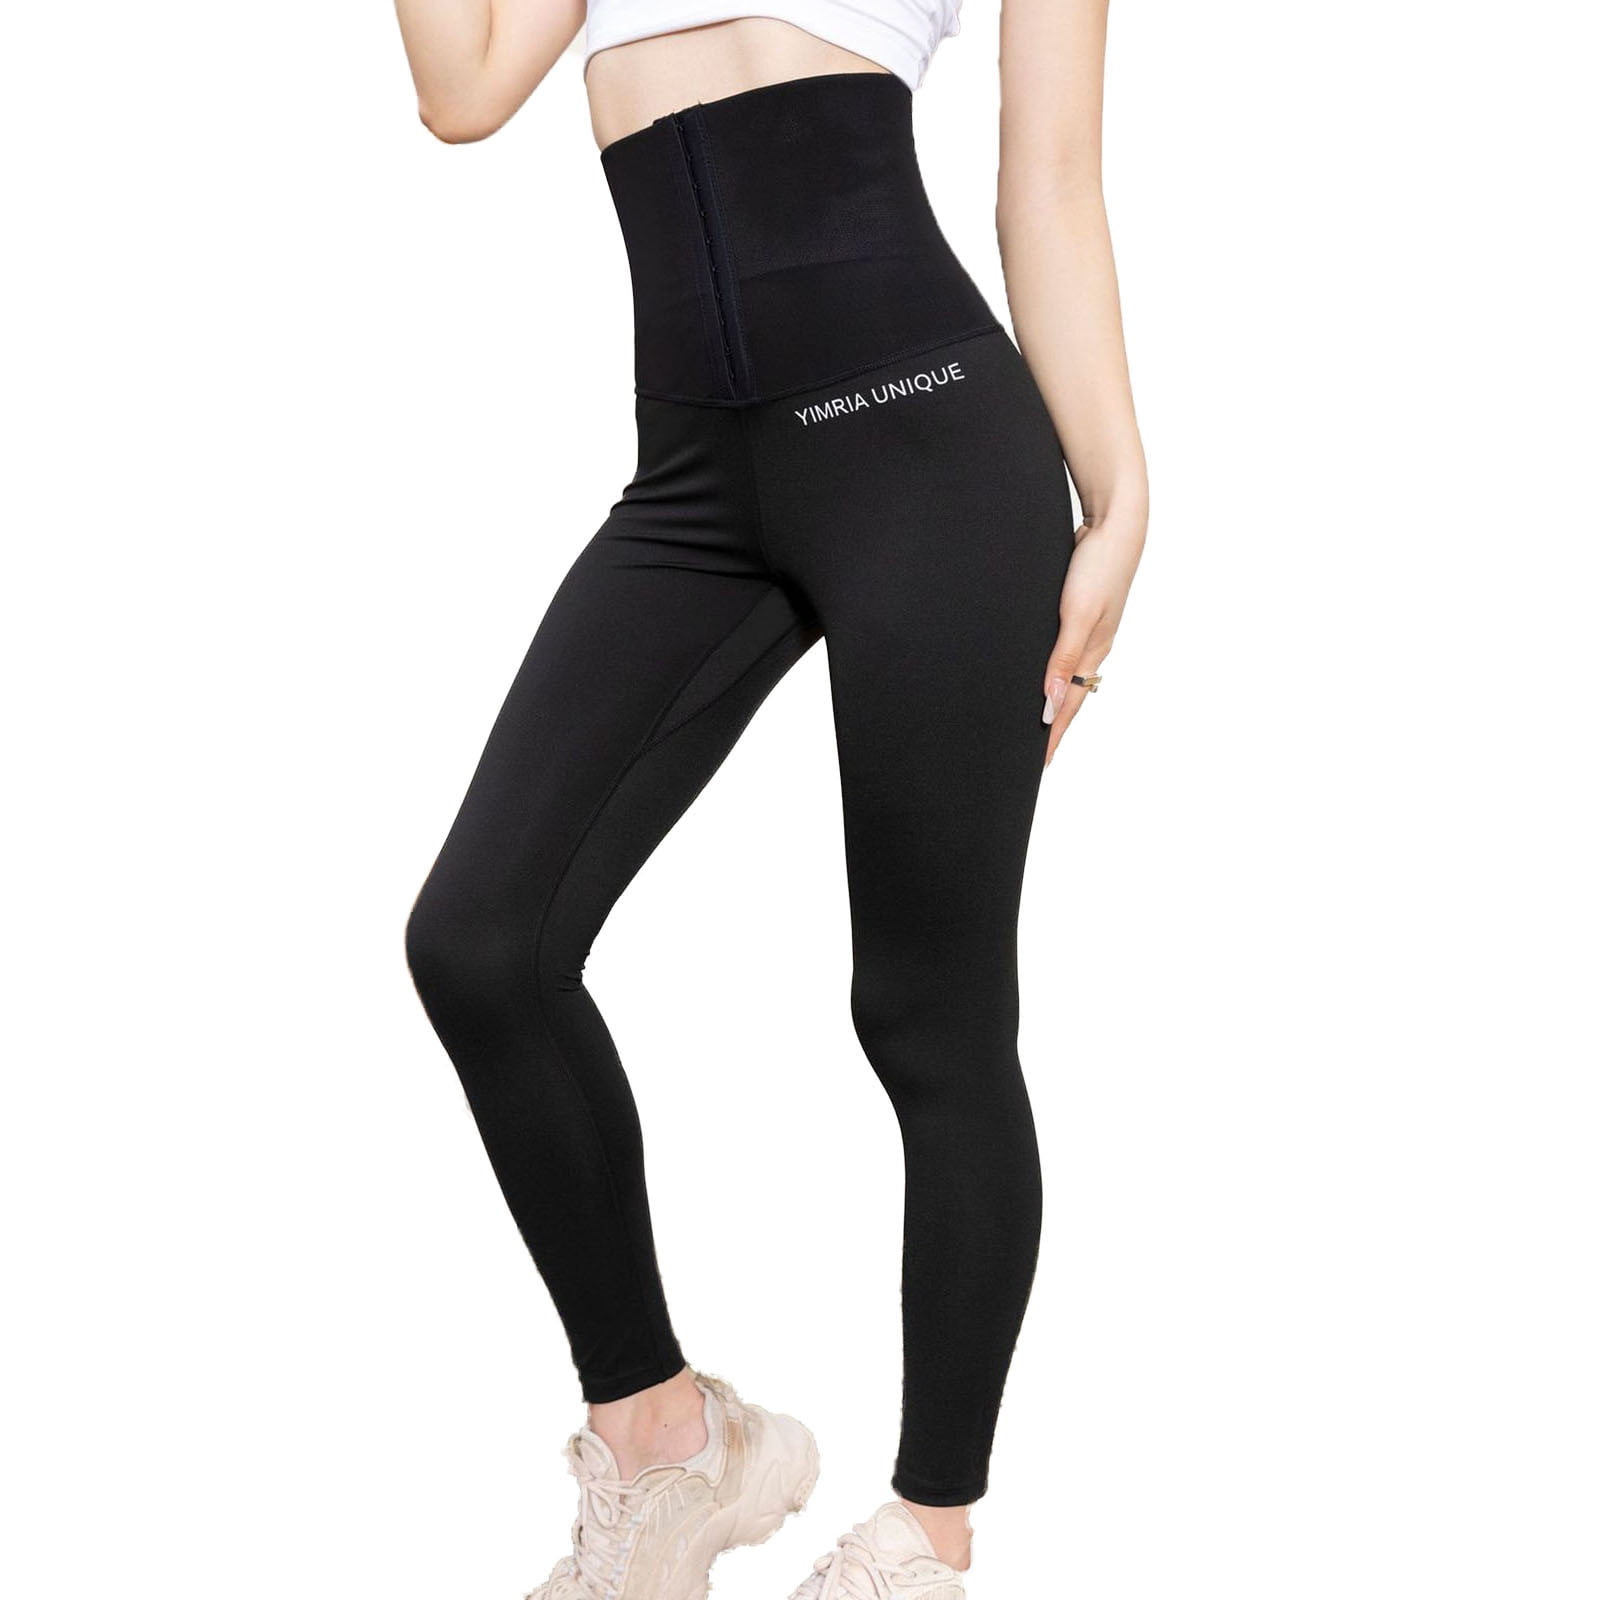 Naked Sensation High Waist Yoga Leggings For Women Elastic Gym Wear,  Fitness Running Tights Women, And Workout Pants From Sports_no1, $14.97